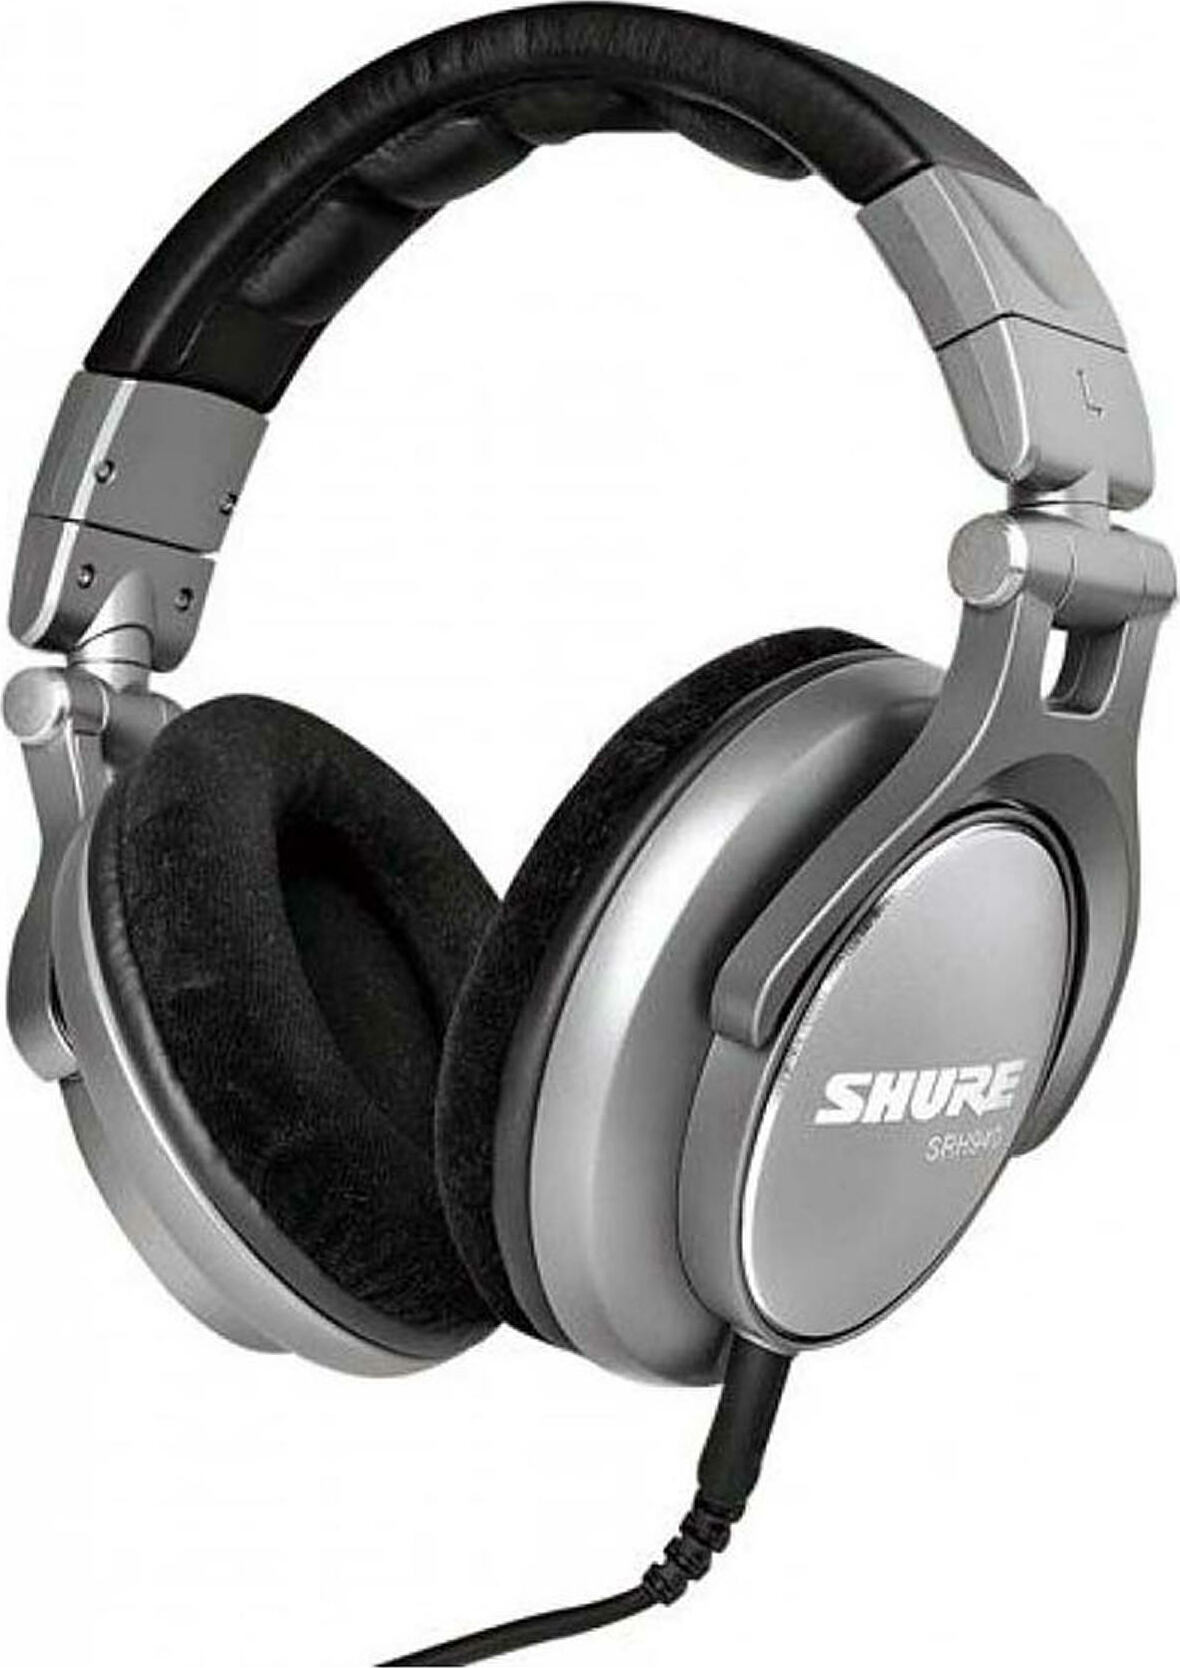 Shure Srh940 - Closed headset - Main picture